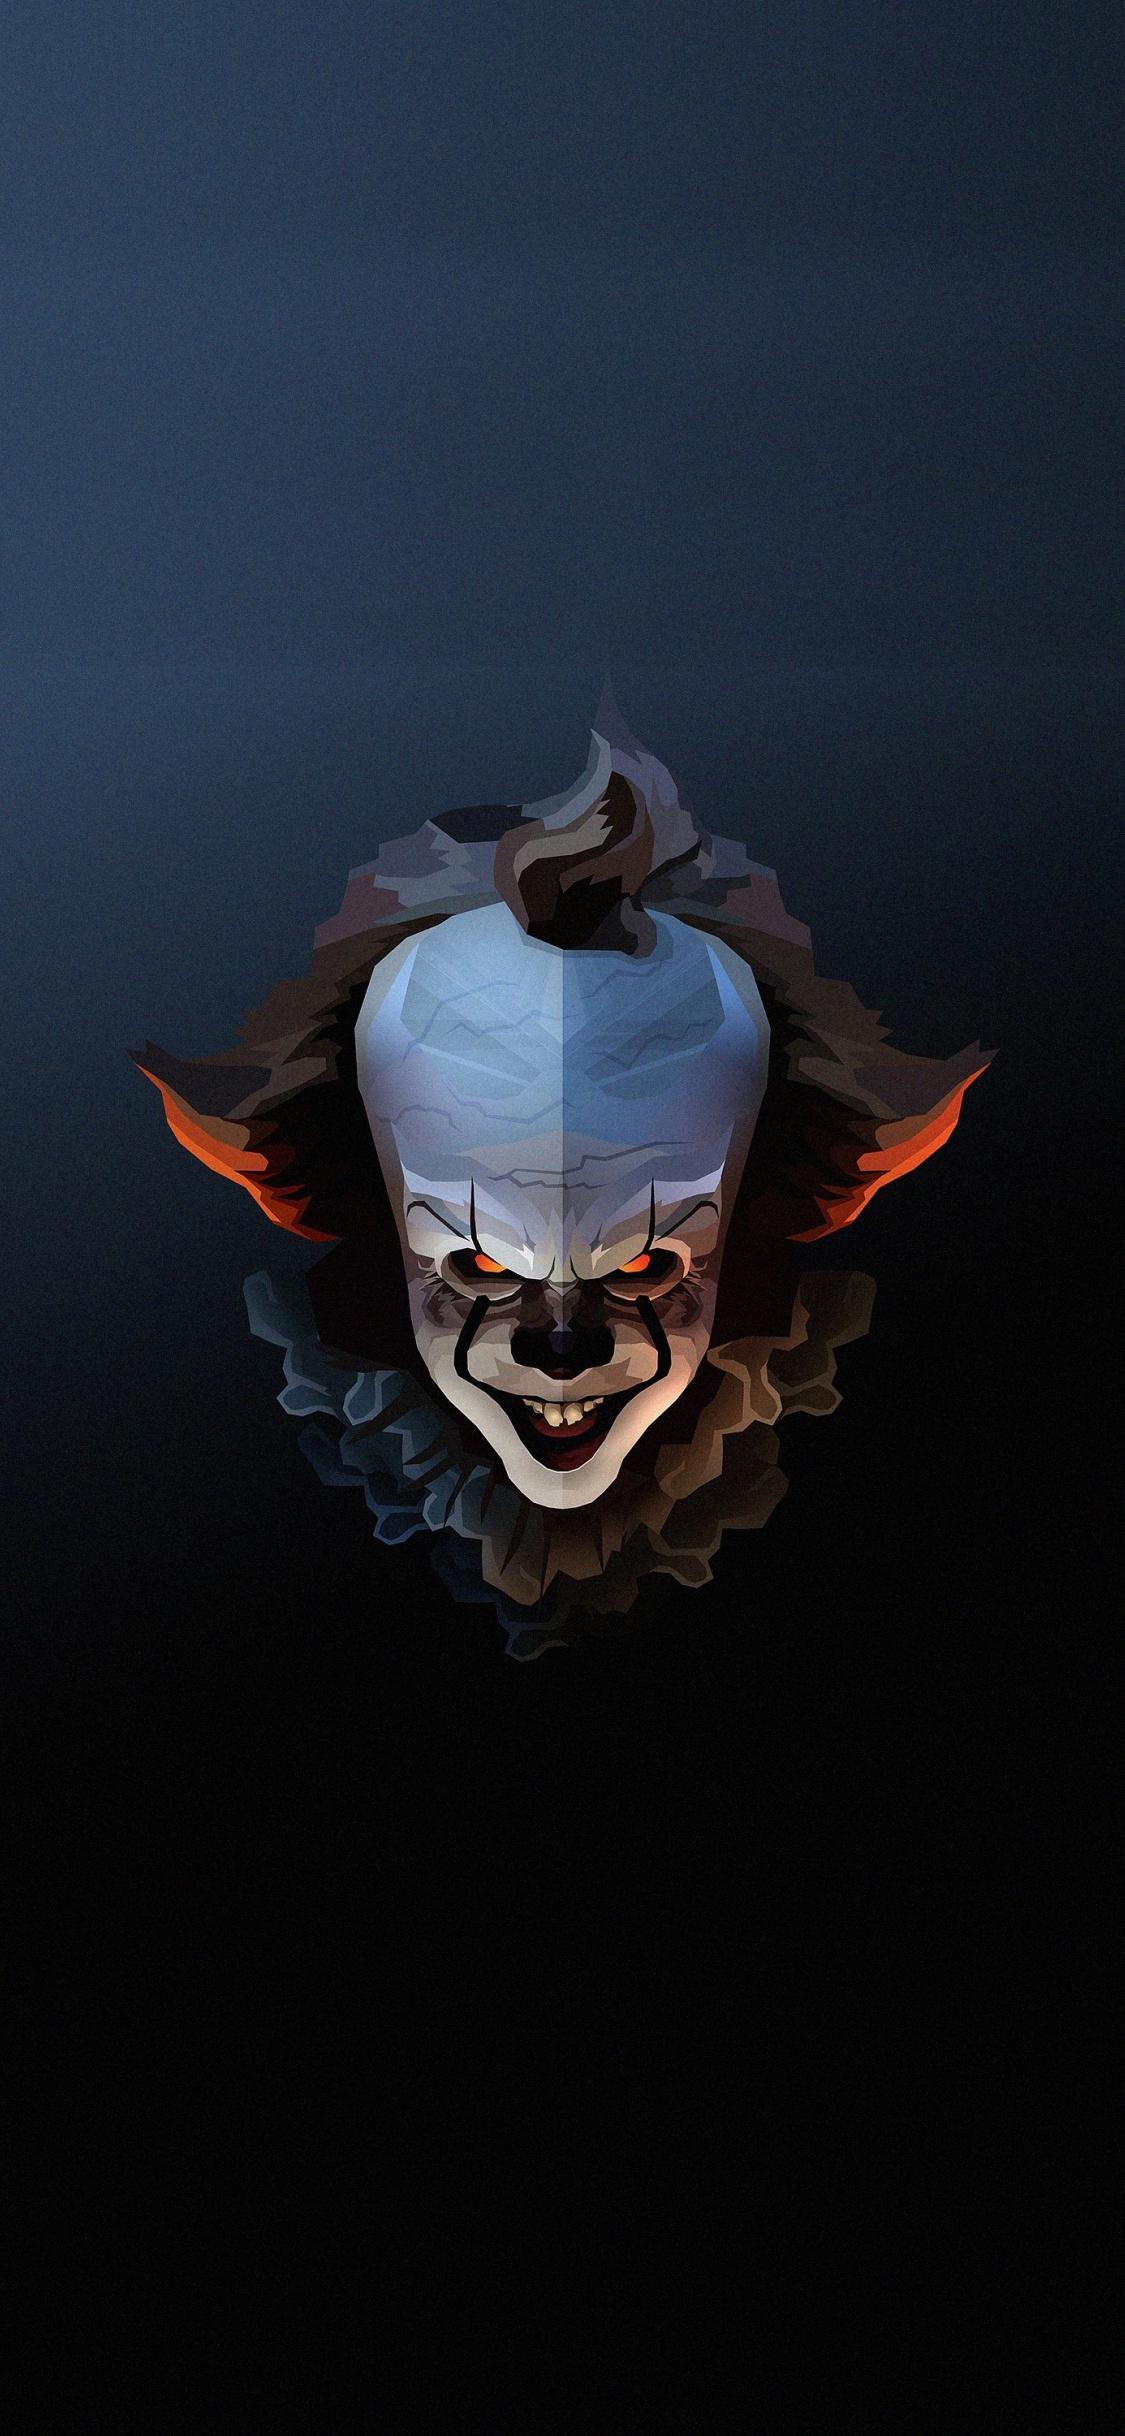 Download 1125x2436 wallpaper pennywise, the clown, halloween